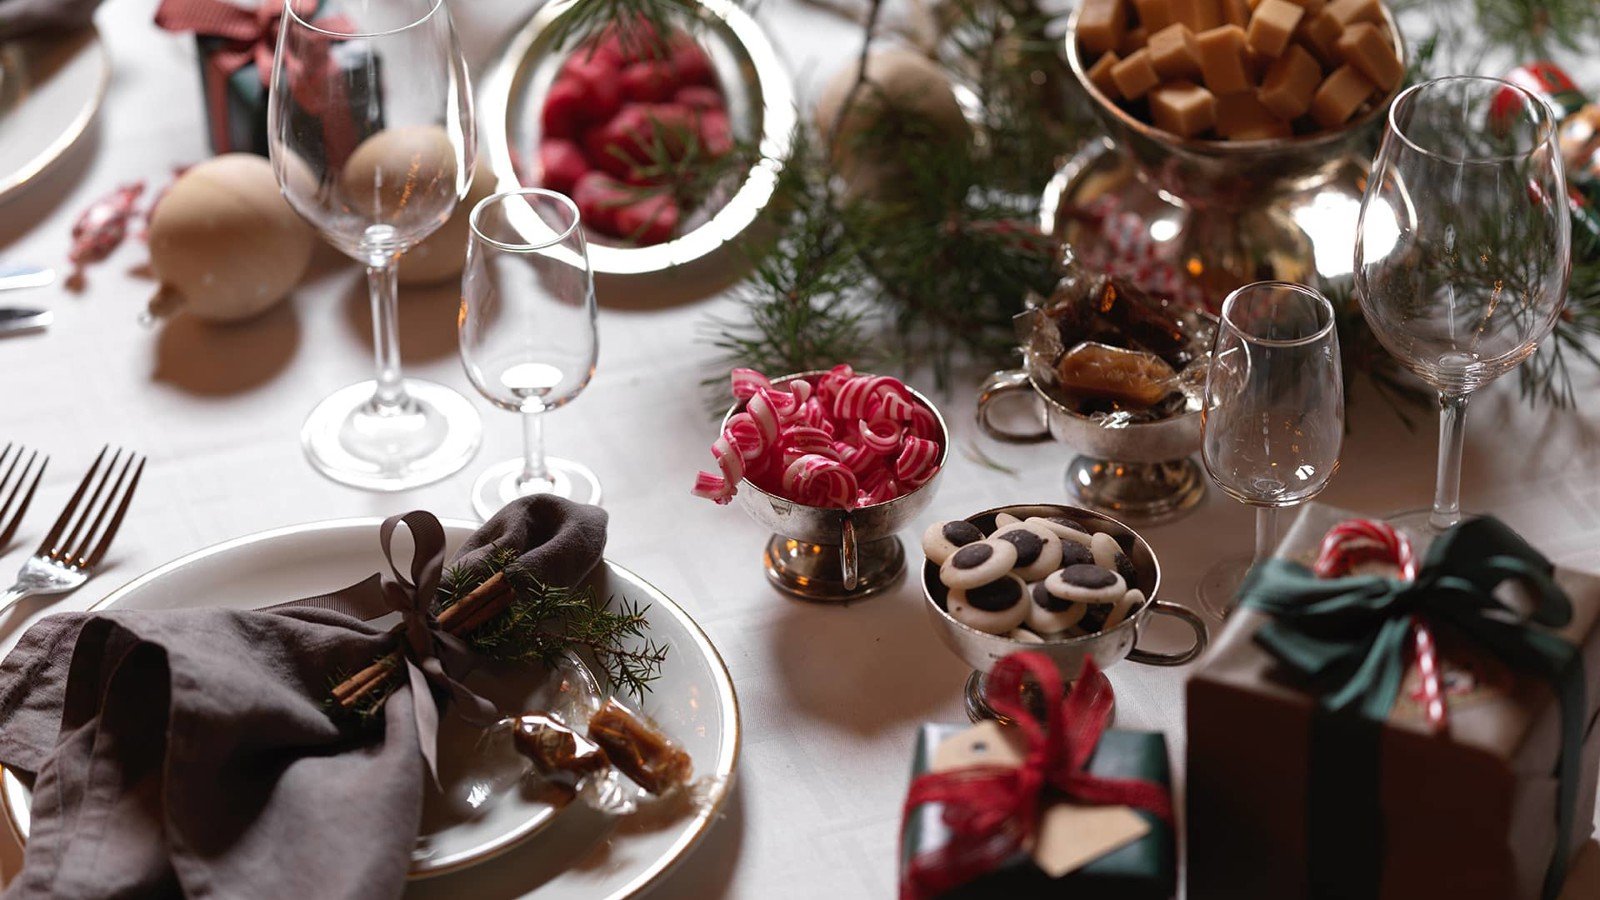 Different types of sweets on the Christmas table